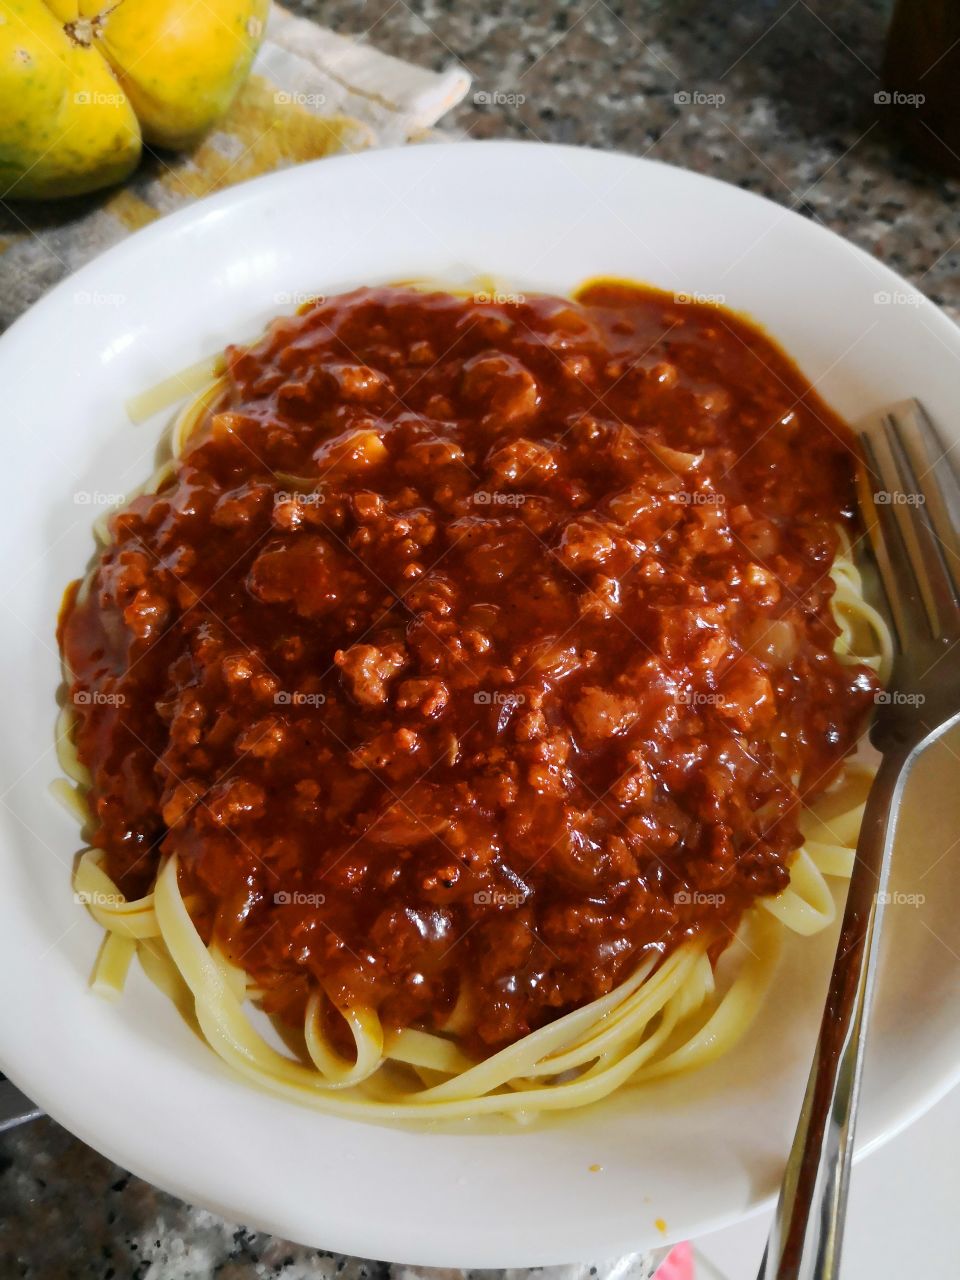 meaty and spicy spaghetti